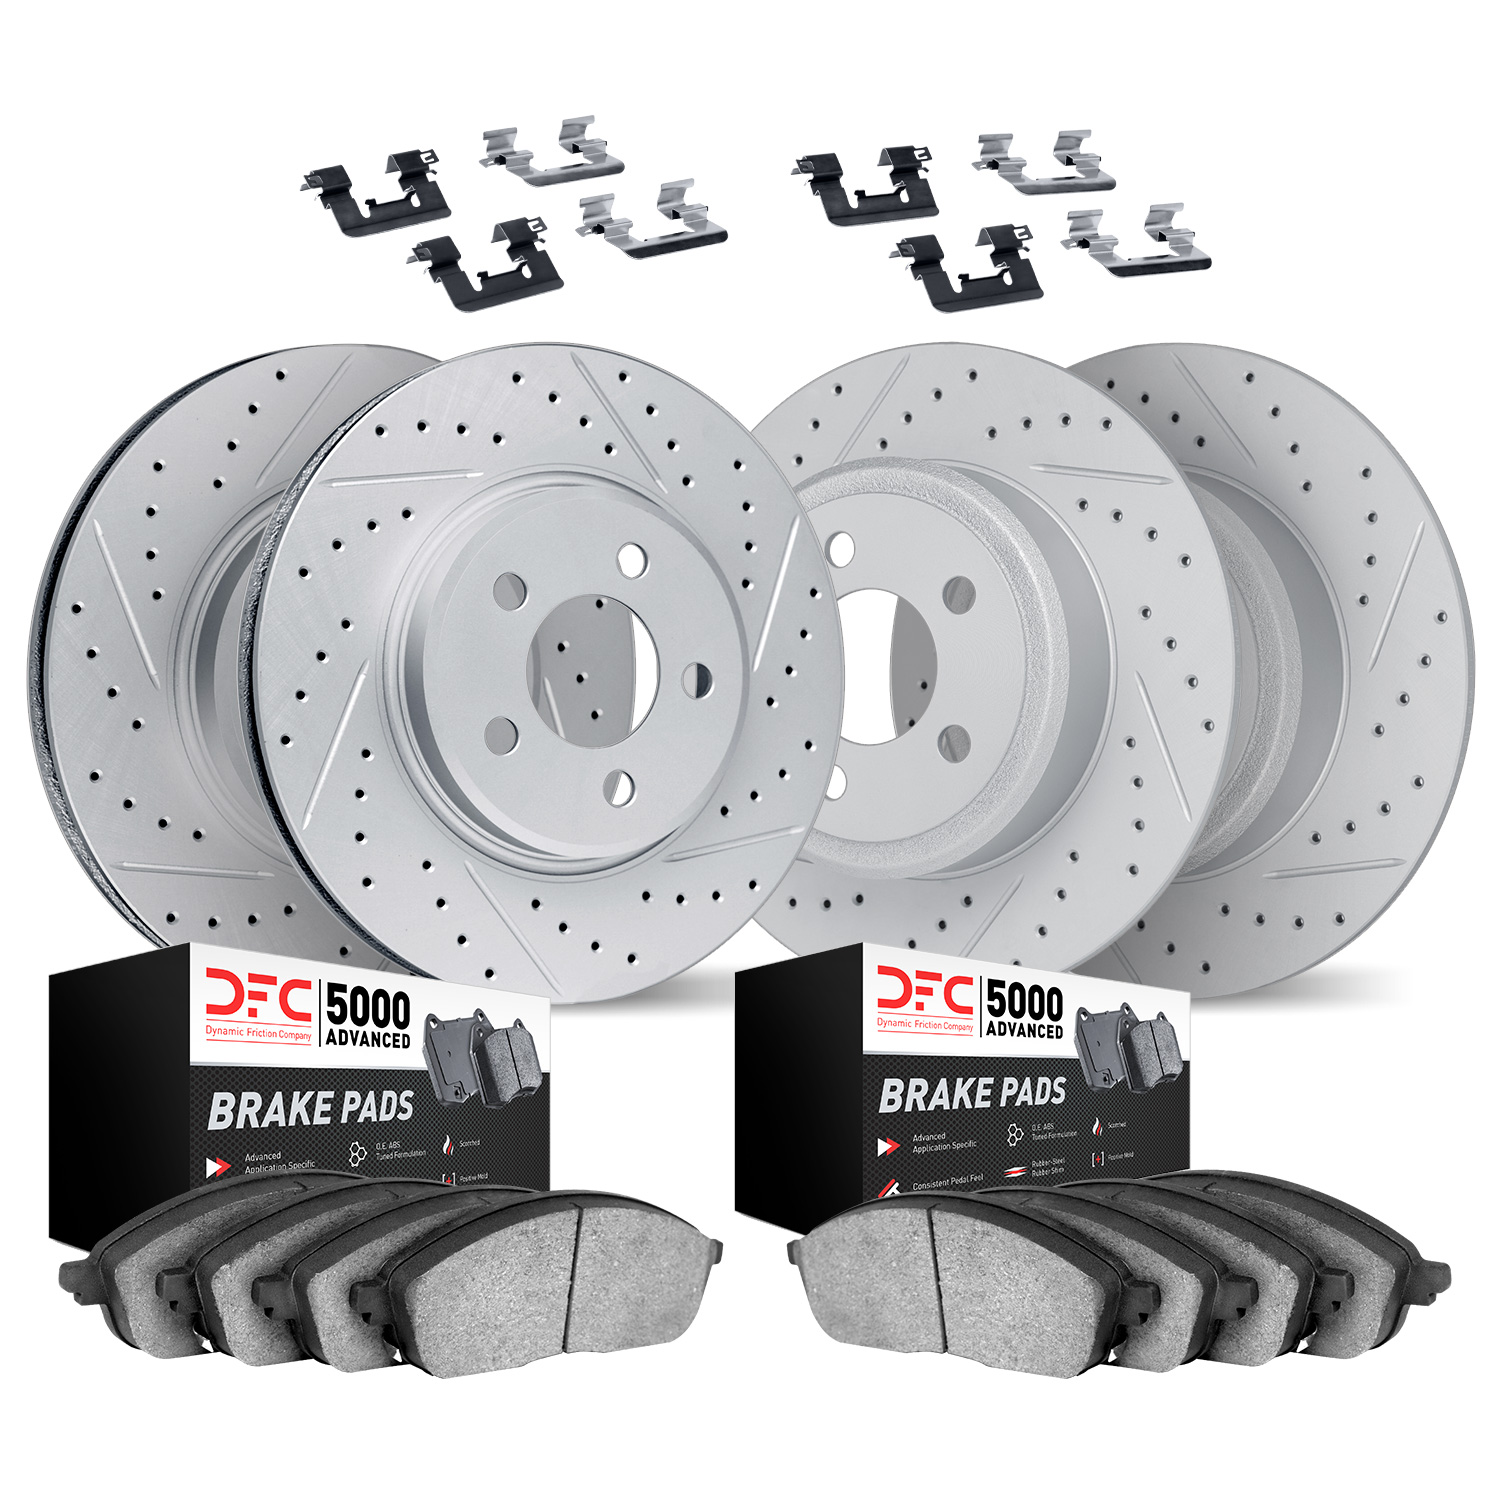 2514-42076 Geoperformance Drilled/Slotted Rotors w/5000 Advanced Brake Pads Kit & Hardware, 2015-2020 Mopar, Position: Front and